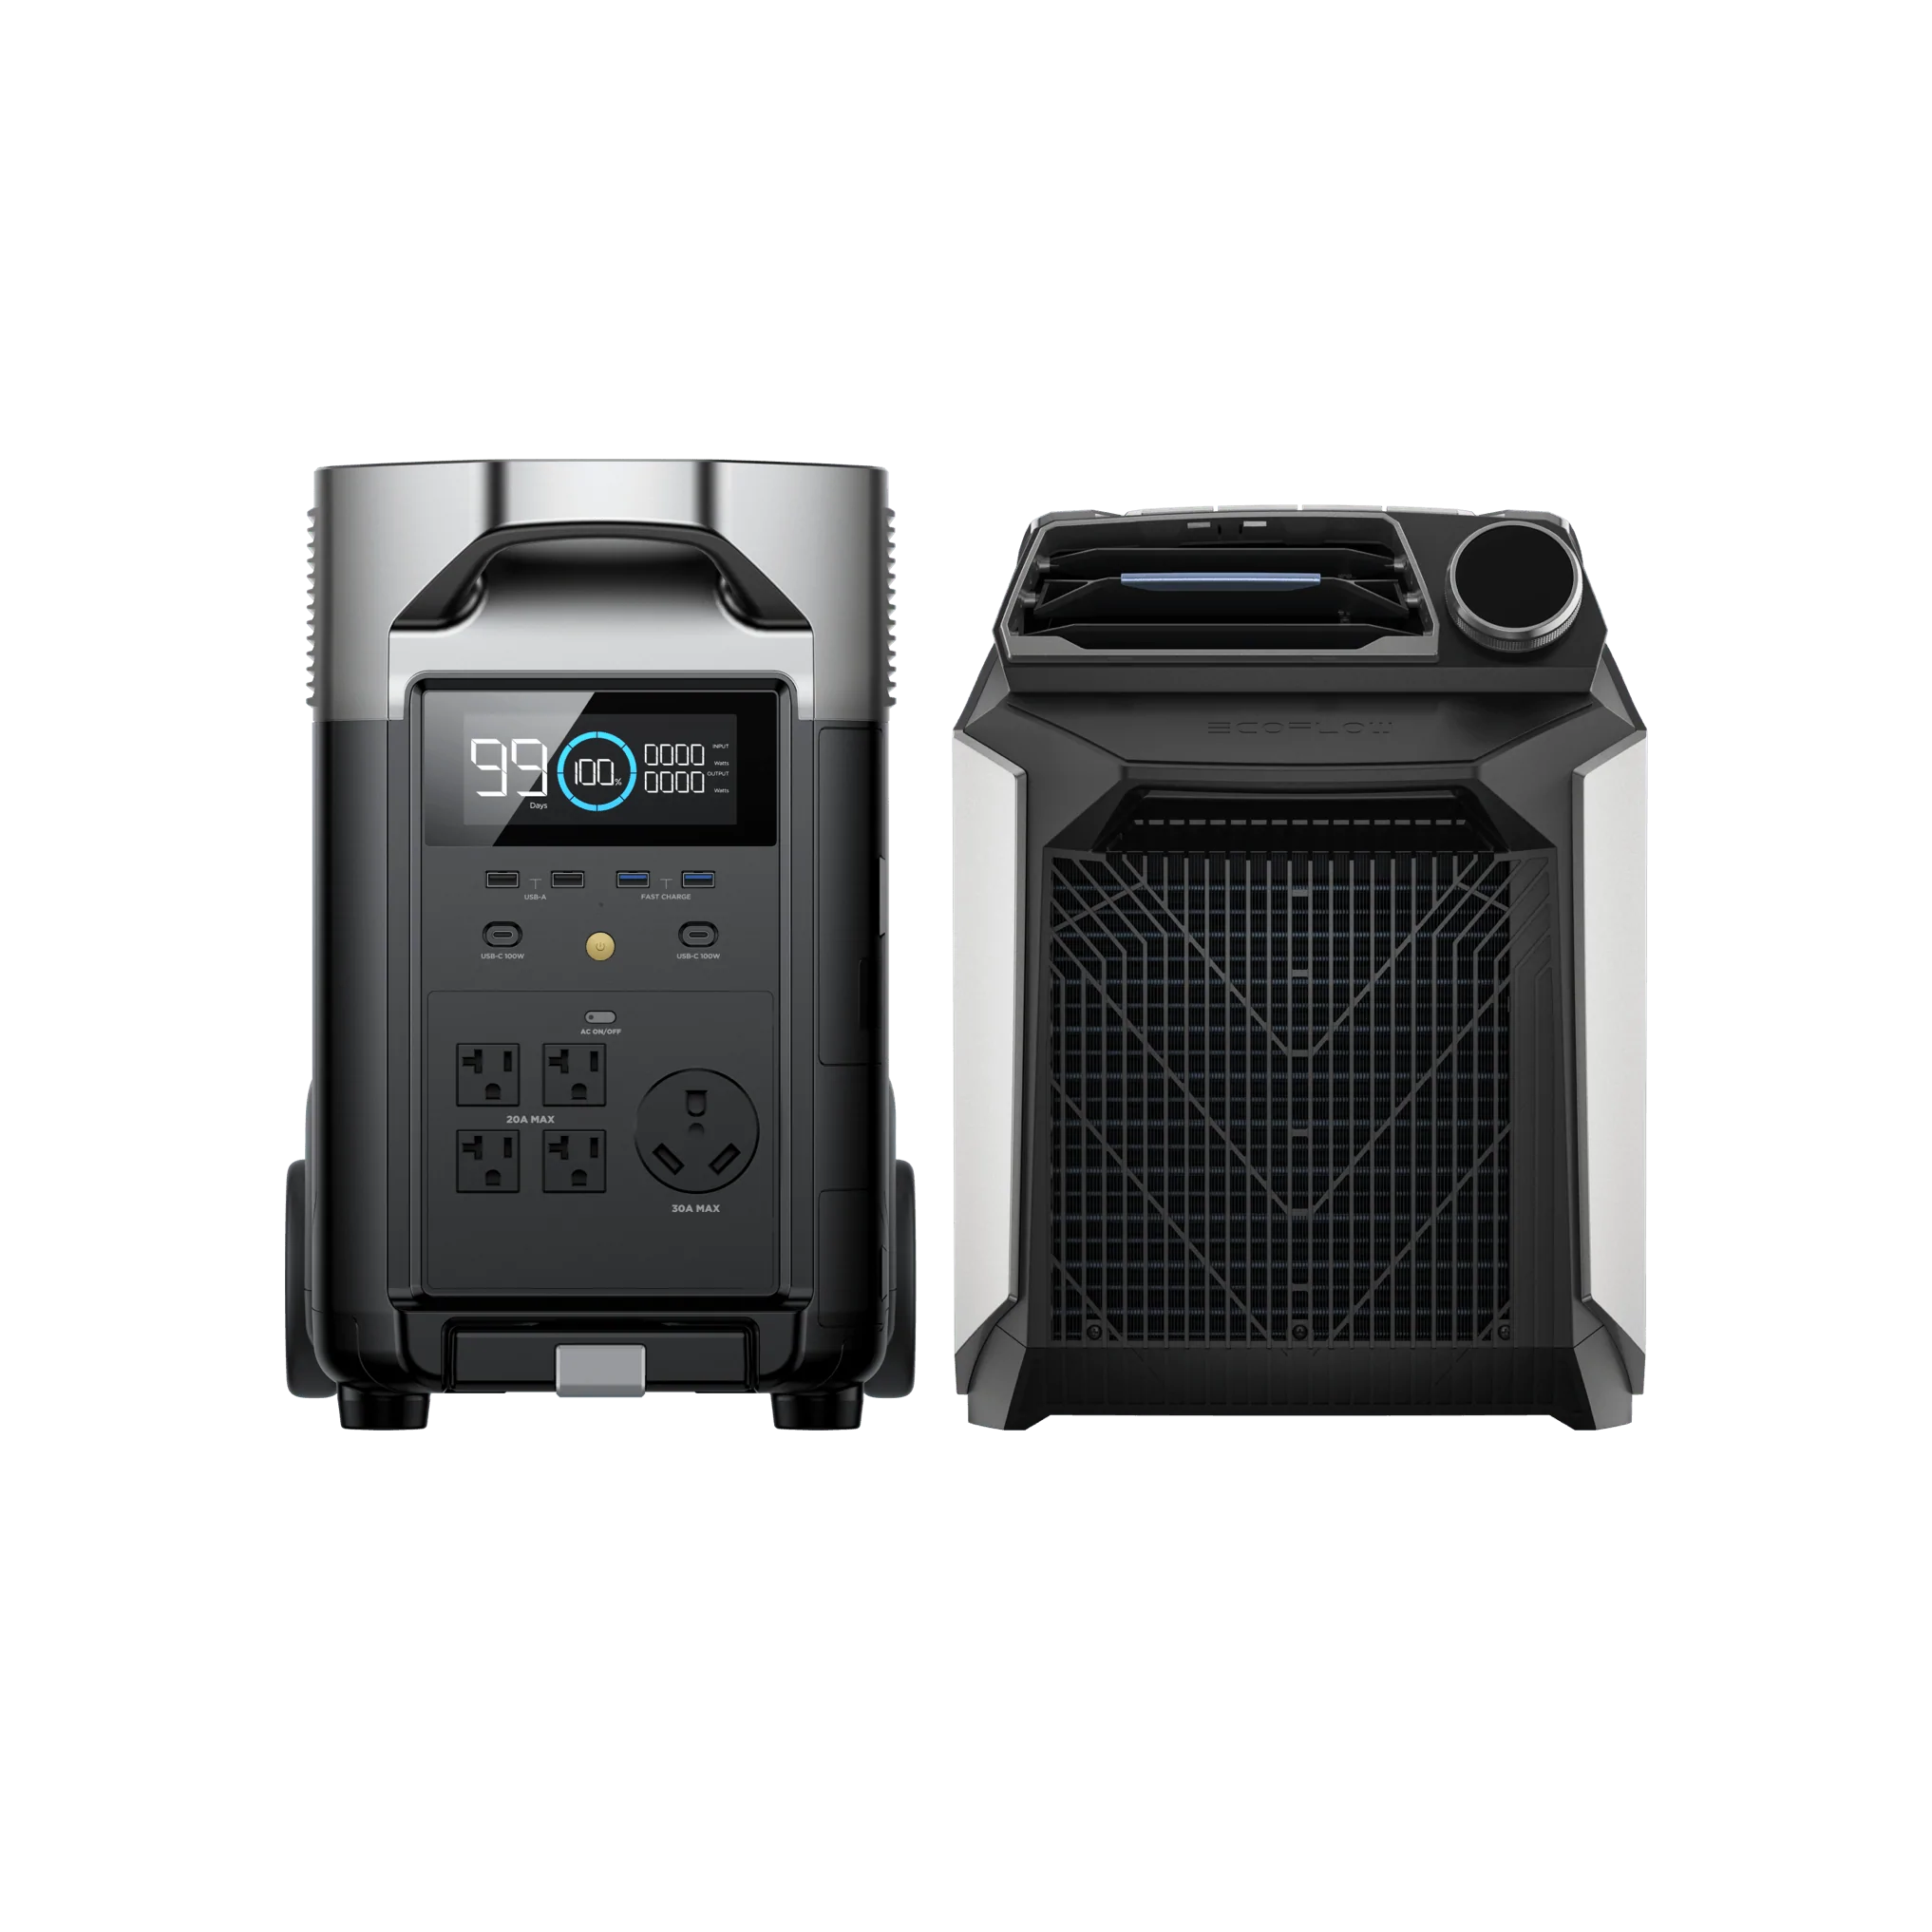 EcoFlow's portable air conditioner with remote control is powered by the DELTA Pro Solar Generator.